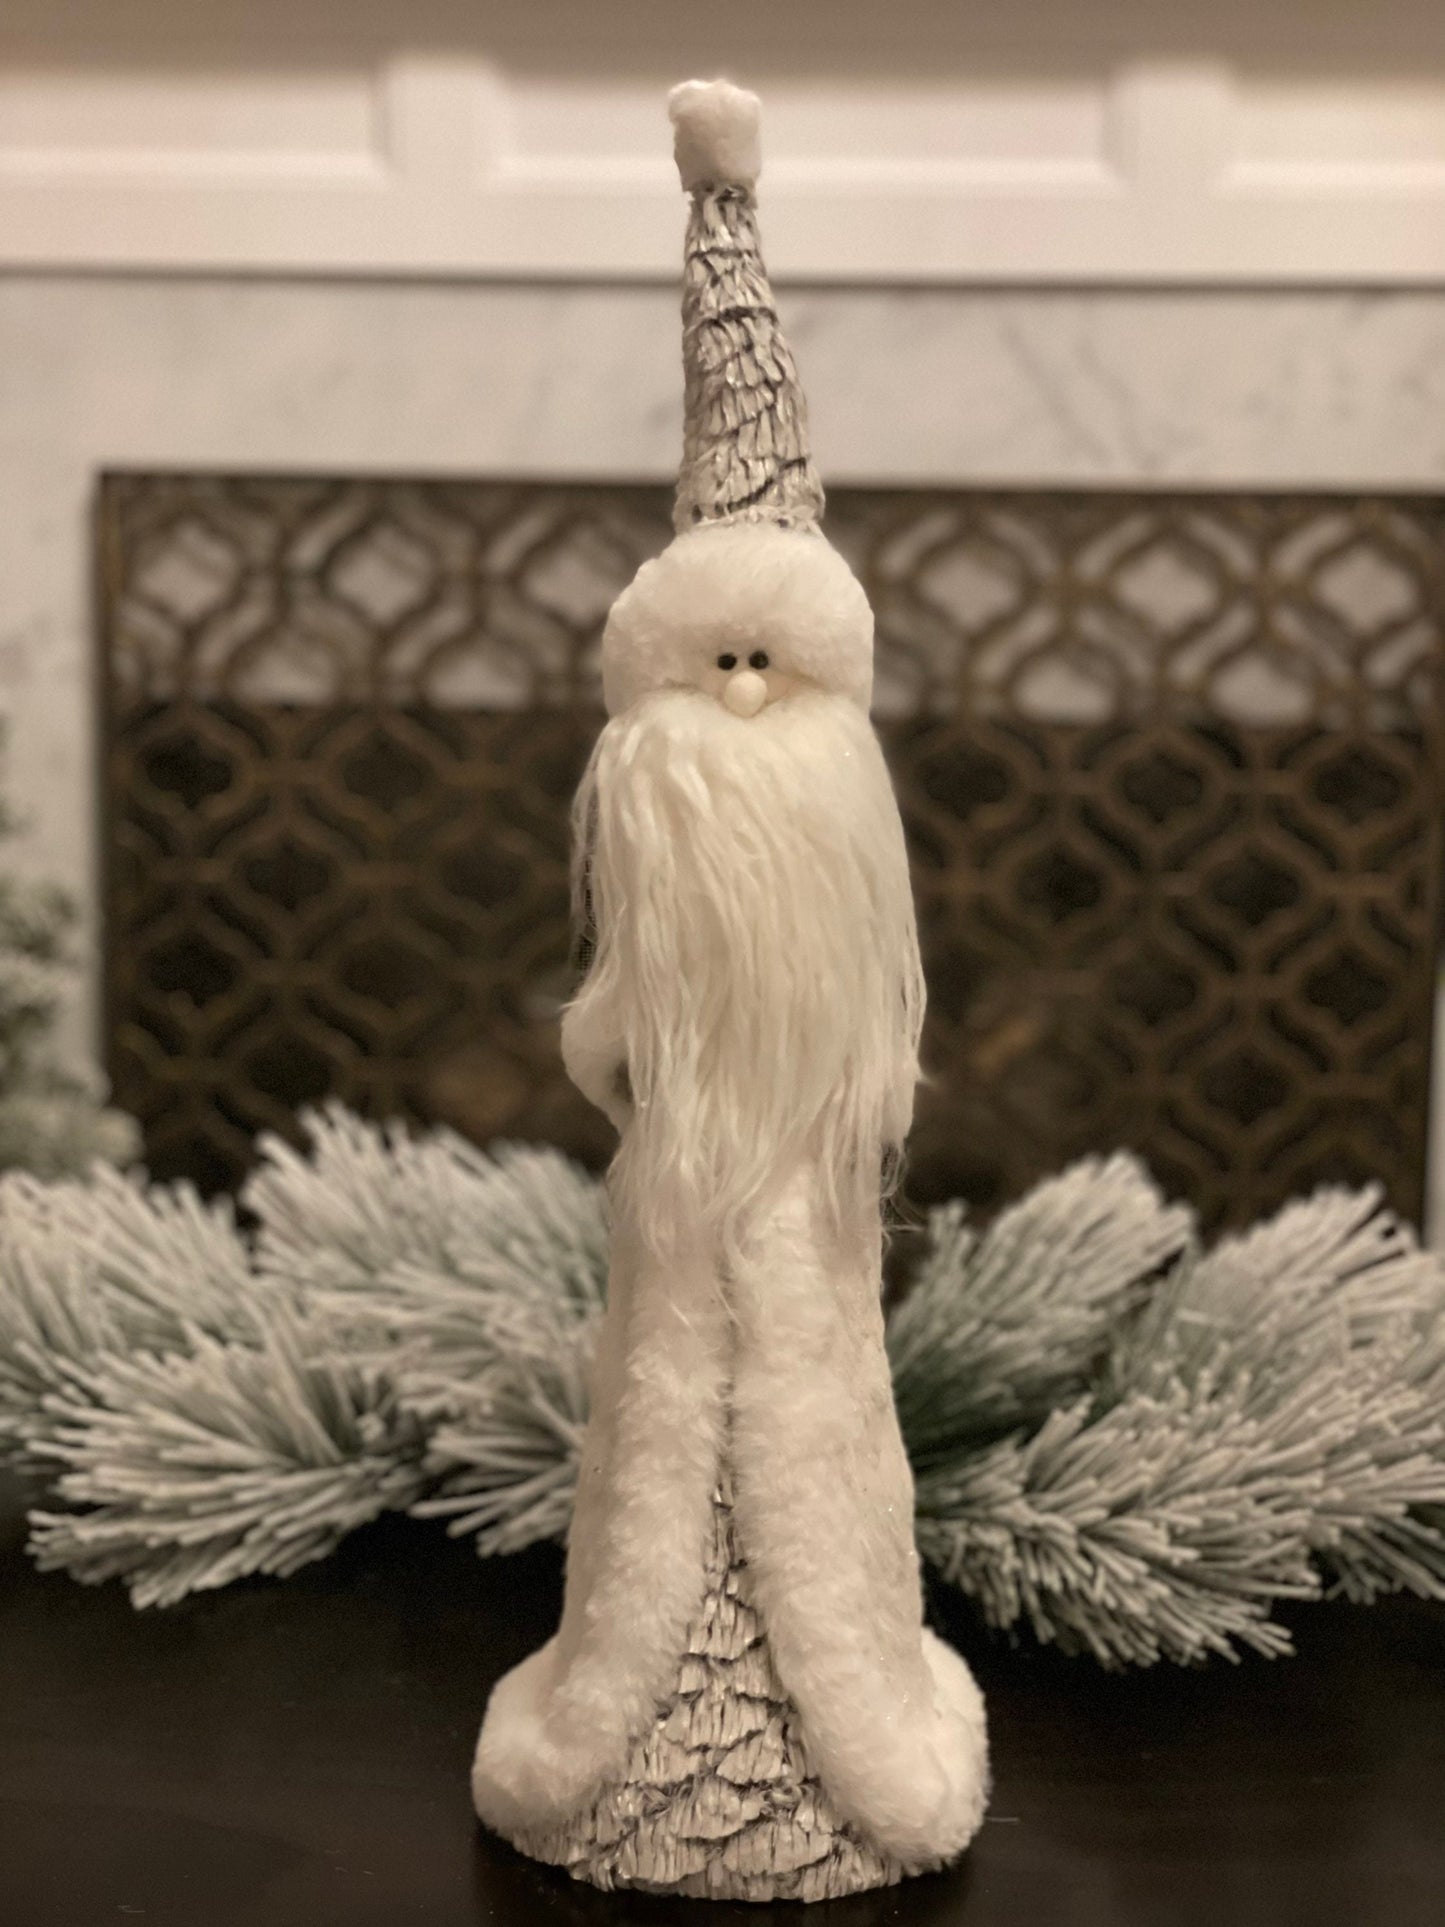 22"x7" frosted artic santa standing.